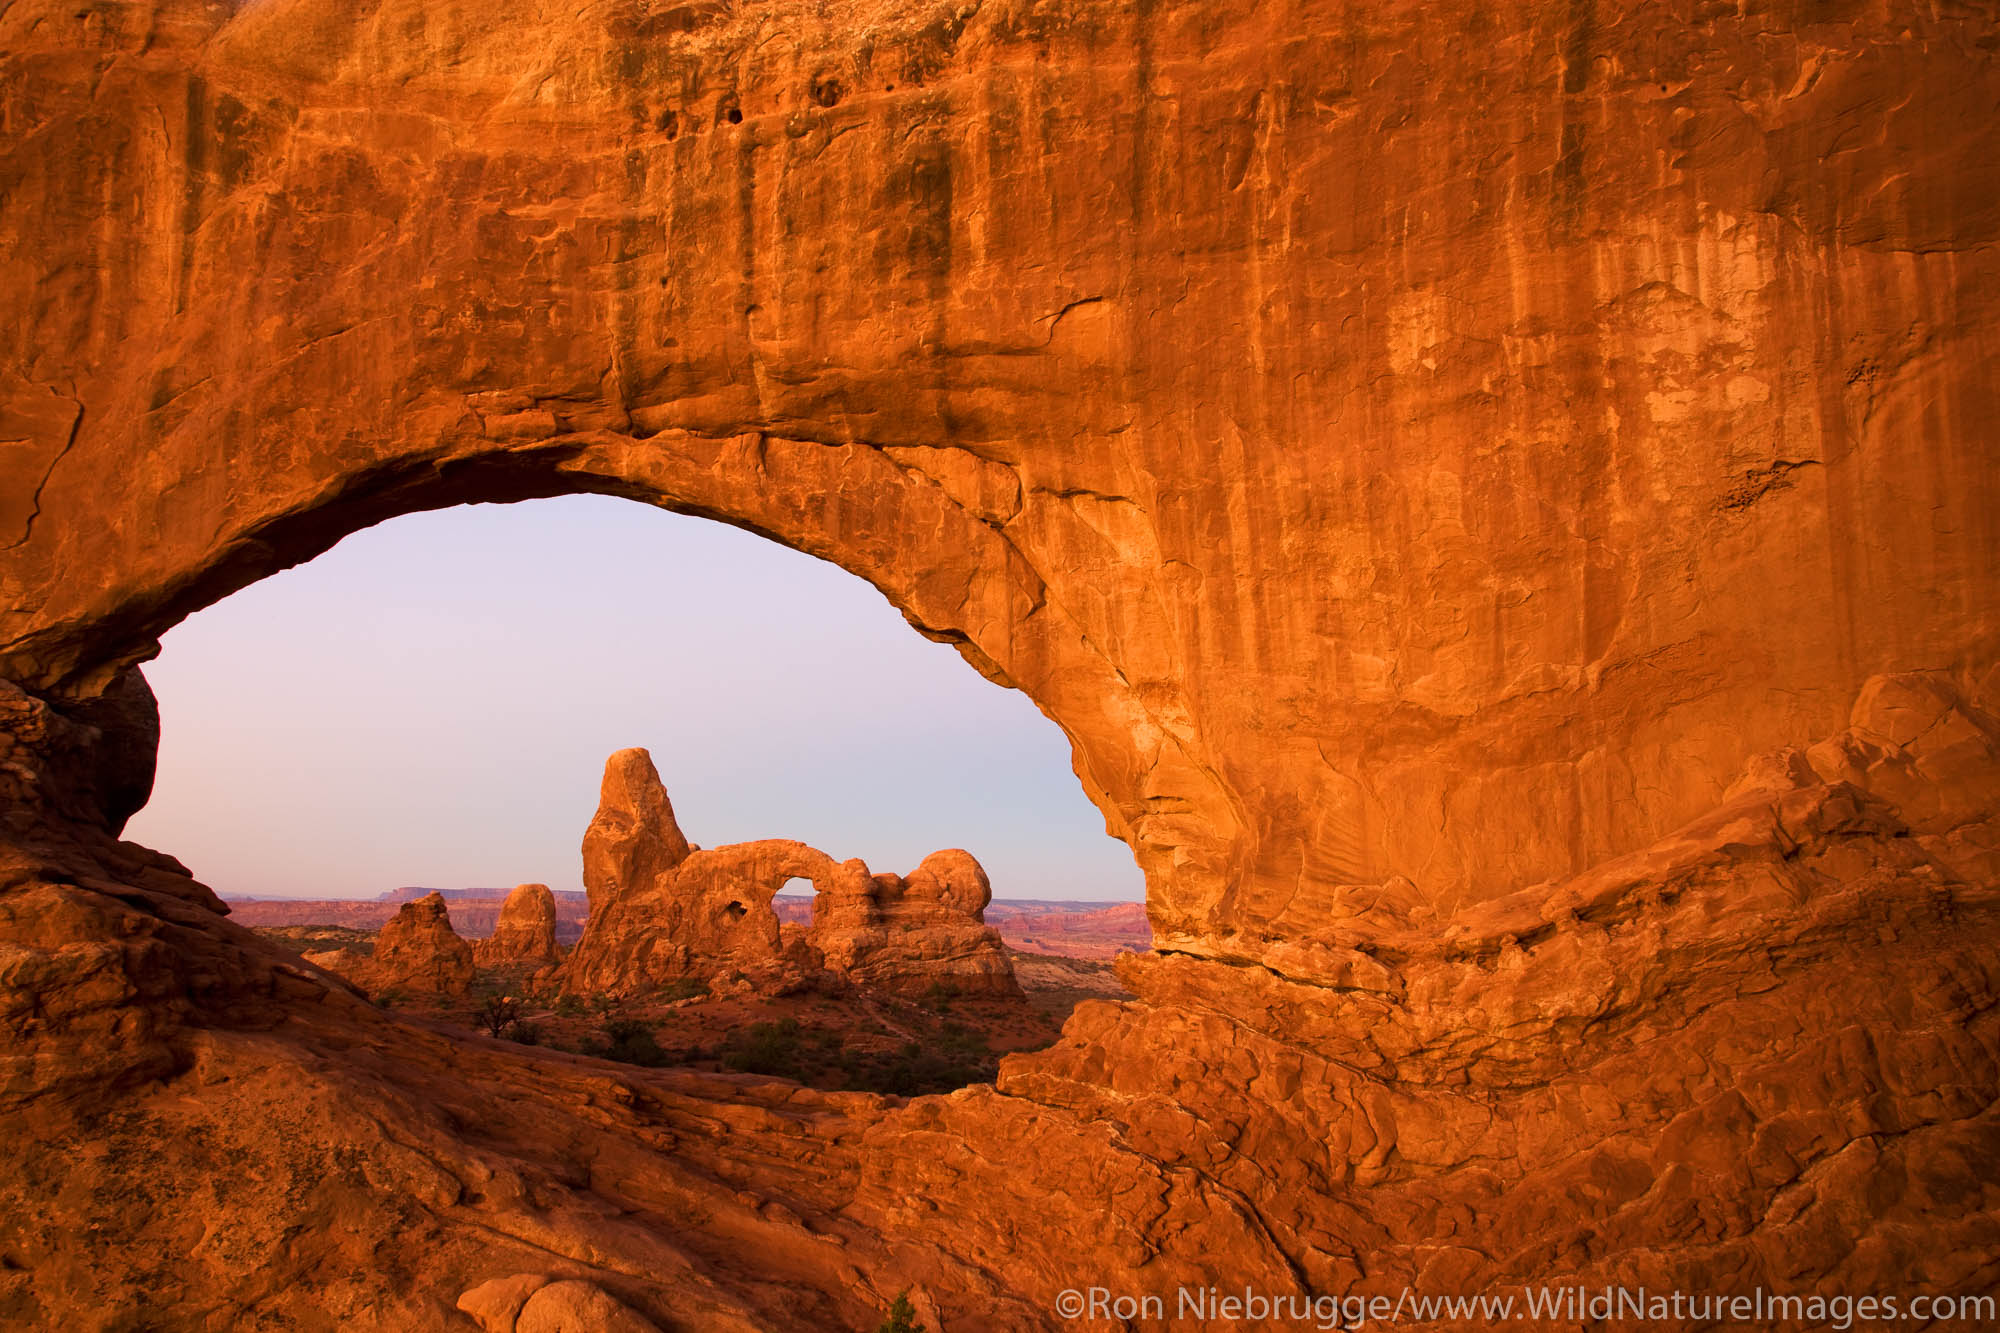 Turret Arch viewed through North Window, Arches National Park, near Moab, Utah.